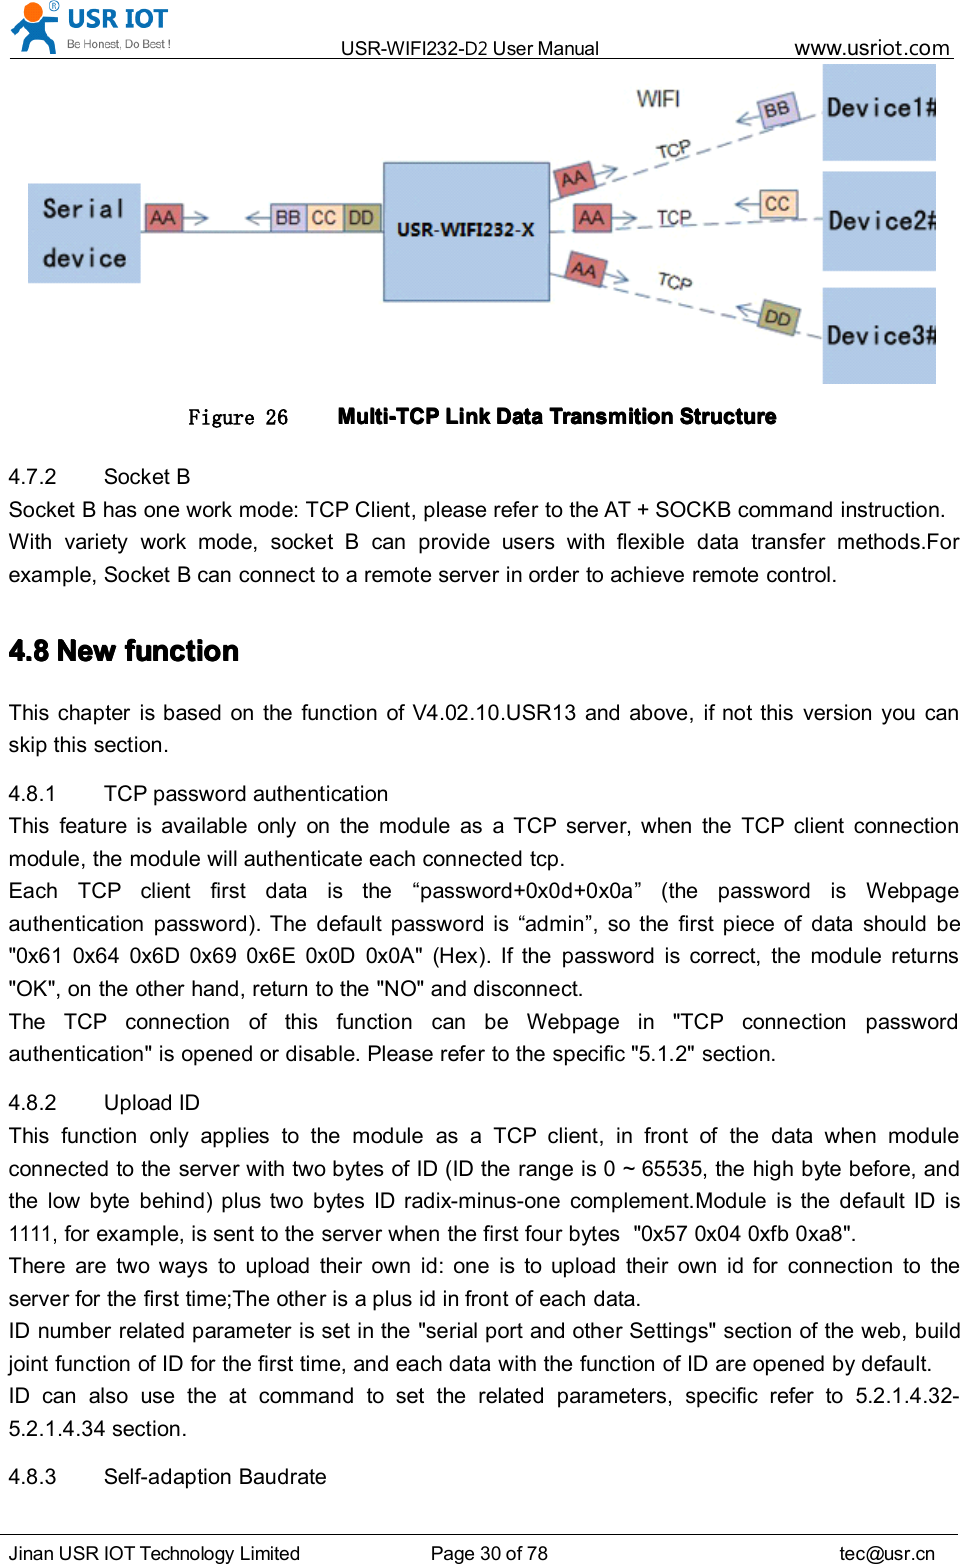 USR-WIFI232- D2 User Manual www.usr iot .comJinan USR IOT Technology Limited Page 30 of 78 tec@usr.cnFigure 26 Multi-TCPMulti-TCPMulti-TCPMulti-TCP LinkLinkLinkLink DataDataDataData TransmitionTransmitionTransmitionTransmition StructureStructureStructureStructure4.7.2 Socket BSocket B has one work mode: TCP Client, please refer to the AT + SOCKB command instruction.With variety work mode, socket B can provide users with flexible data transfer methods.Forexample, Socket B can connect to a remote server in order to achieve remote control.4.84.84.84.8 NewNewNewNew functionfunctionfunctionfunctionThis chapter is based on the function of V4.02.10.USR13 and above, if not this version you canskip this section.4.8.1 TCP password authenticationThis feature is available only on the module as a TCP server, when the TCP client connectionmodule, the module will authenticate each connected tcp.Each TCP client first data is the “ password +0x0d+0x0a ” (the password is Webpageauthentication password). The default password is “ admin ” , so the first piece of data should be&quot;0x61 0x64 0x6D 0x69 0x6E 0x0D 0x0A&quot; ( Hex ). If the password is correct, the module returns&quot;OK&quot;, on the other hand, return to the &quot;NO&quot; and disconnect.The TCP connection of this function can be Webpage in &quot;TCP connection passwordauthentication&quot; is opened or disable. Please refer to the specific &quot;5.1.2&quot; section.4.8.2 Upload IDThis function only applies to the module as a TCP client, in front of the data when moduleconnected to the server with two bytes of ID (ID the range is 0 ~ 65535, the high byte before, andthe low byte behind) plus two bytes ID radix-minus-one complement.Module is the default ID is1111,for example, is sent to the server when the first four bytes &quot;0x57 0x04 0xfb 0 xa8&quot;.There are two ways to upload their own id: one is to upload their own id for connection to theserver for the first time;The other is a plus id in front of each data.ID number related parameter is set in the &quot;serial port and other Settings&quot; section of the web, buildjoint function of ID for the first time, and each data with the function of ID are opened by default.ID can also use the at command to set the related parameters, specific refer to 5.2.1.4.32-5.2.1.4.34 section.4.8.3 S elf-adaption Baudrate